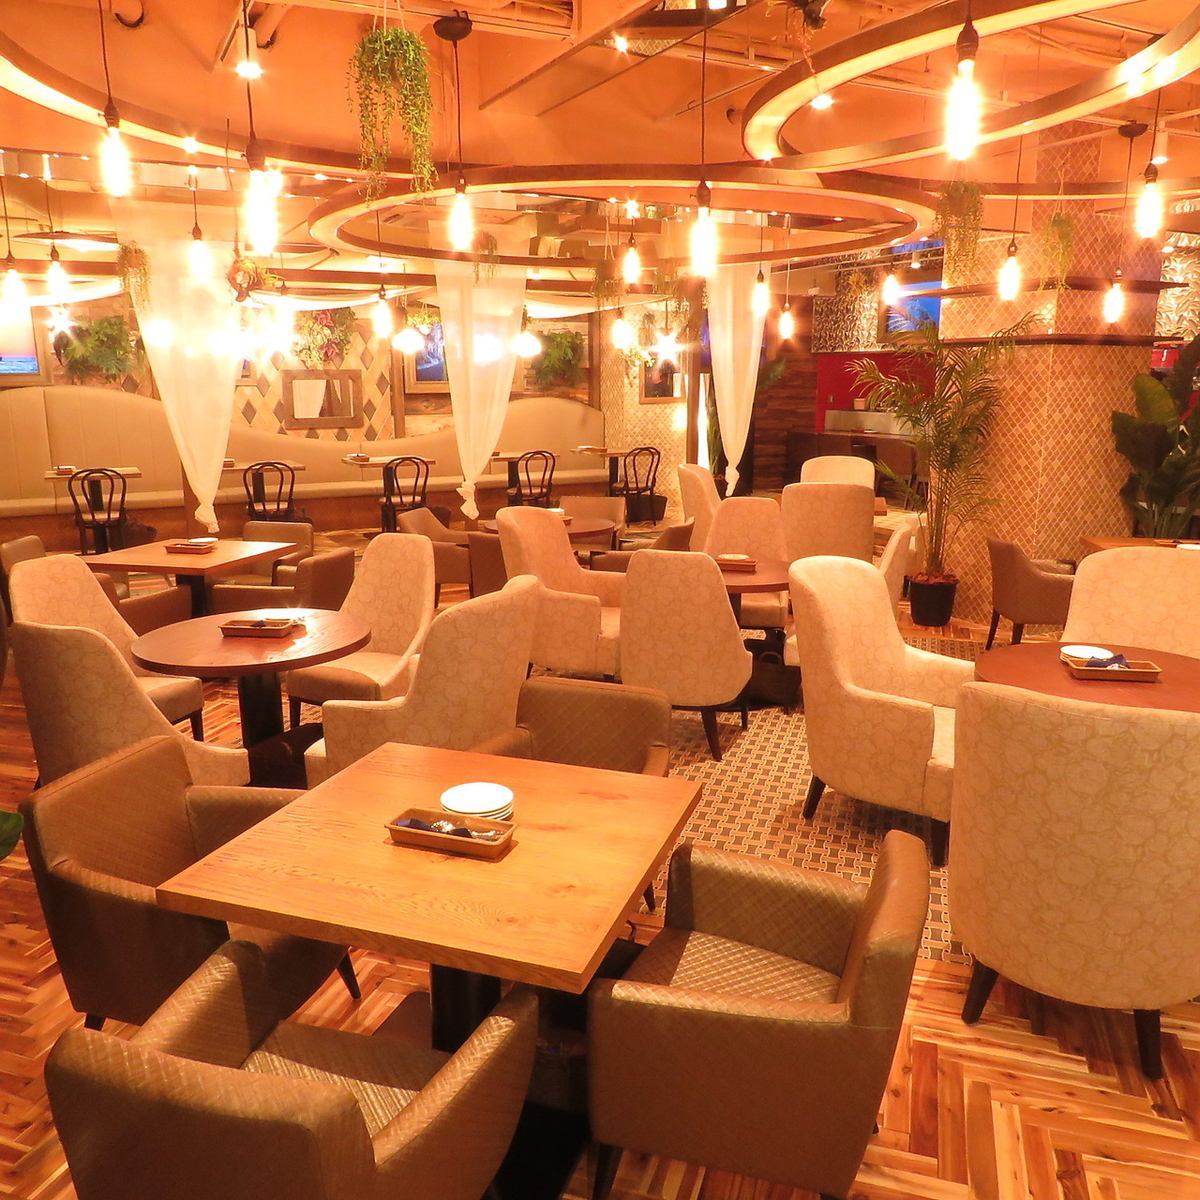 It's like a luxury hotel lounge.Have a great time at a new Mediterranean restaurant.